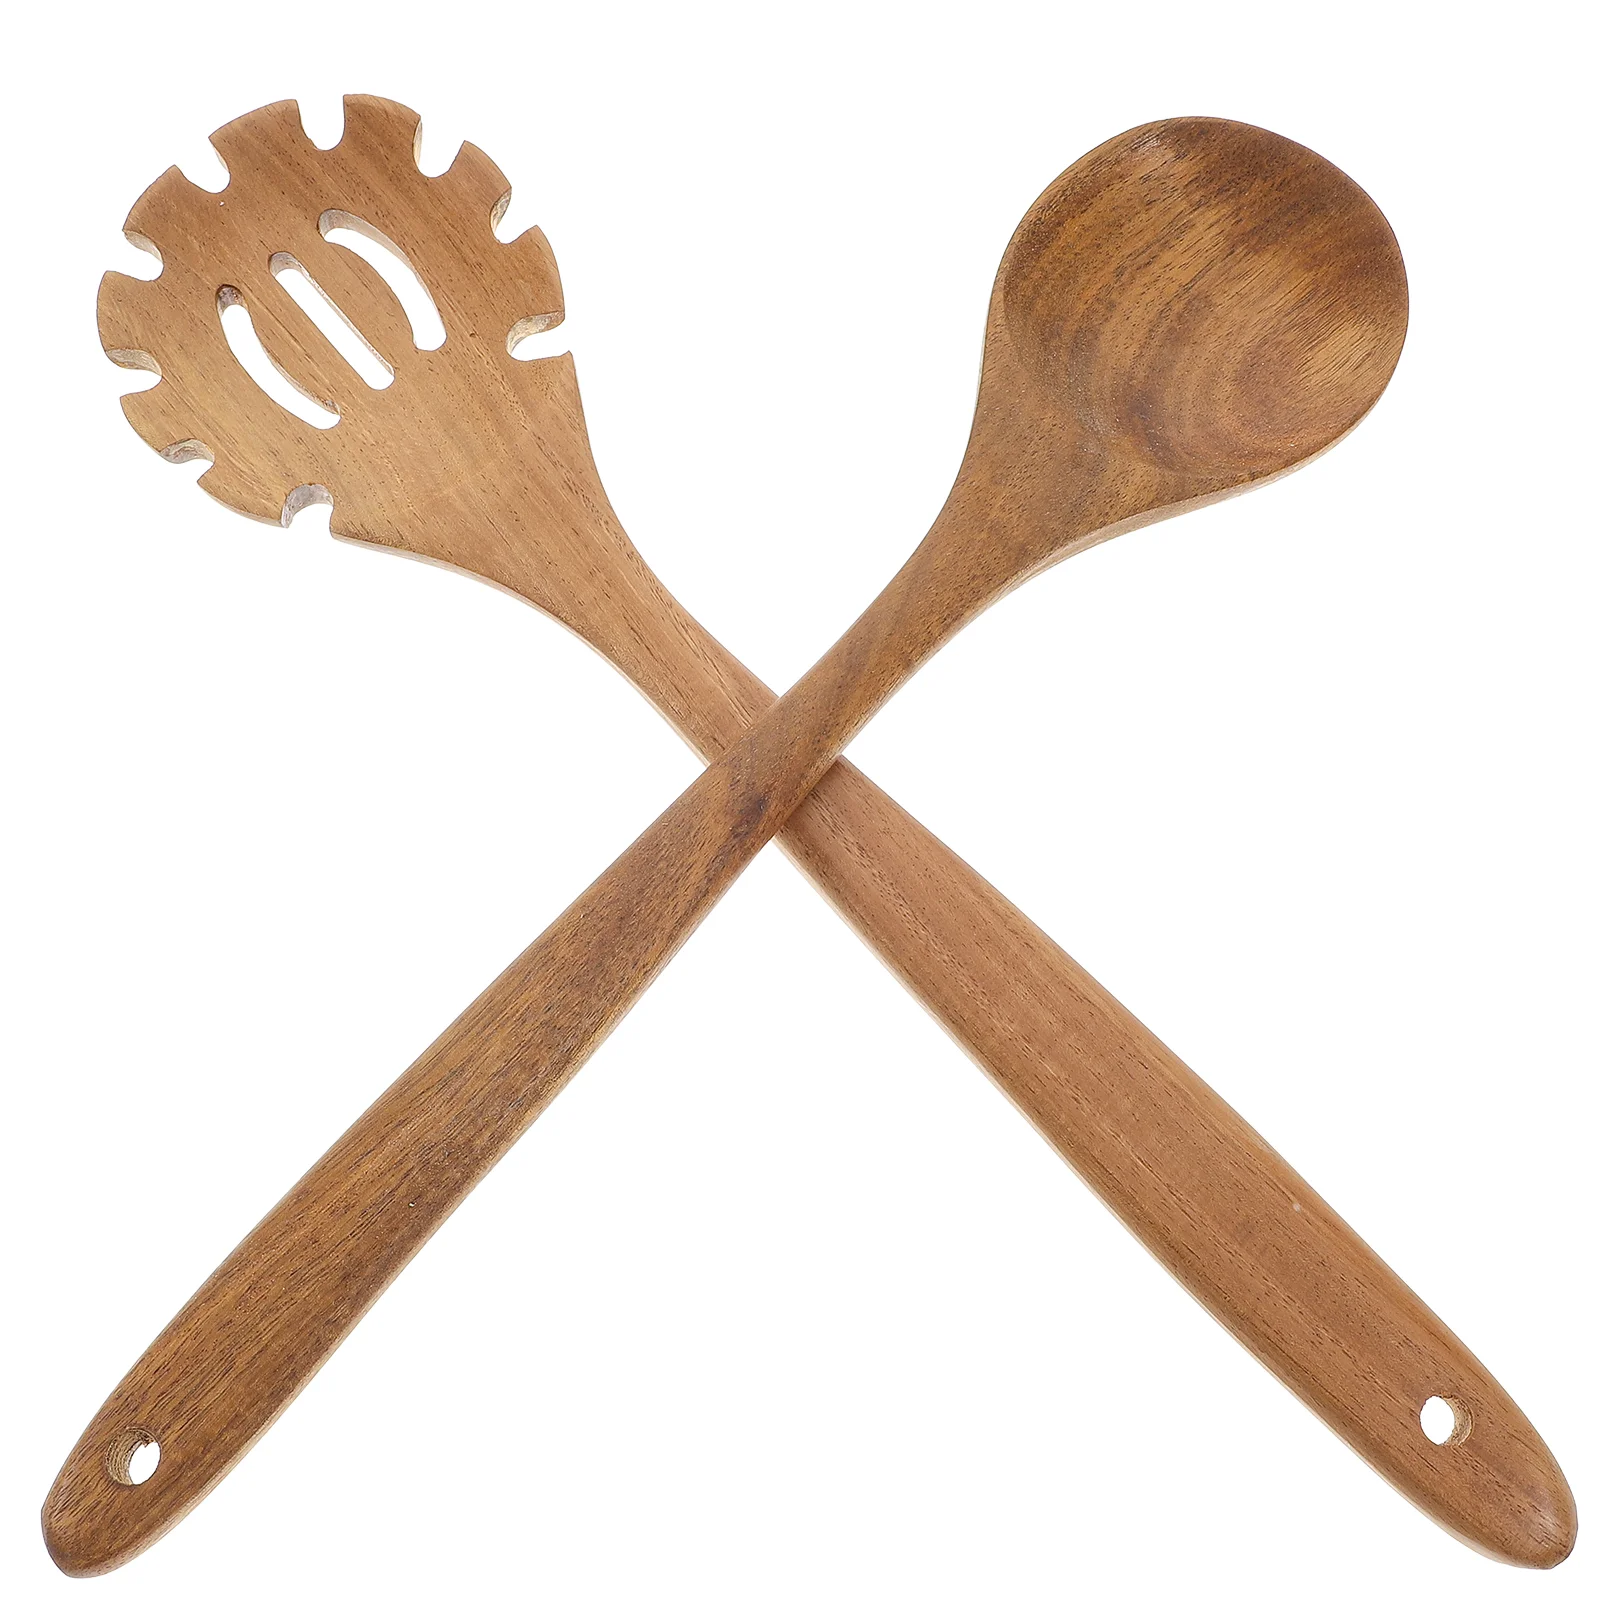 

Spoon Wooden Spaghetti Pasta Ladle Spoons Mixing Soup Noodles Fork Kitchen Server Rice Utensil Serving Slotted Noodle Cooking